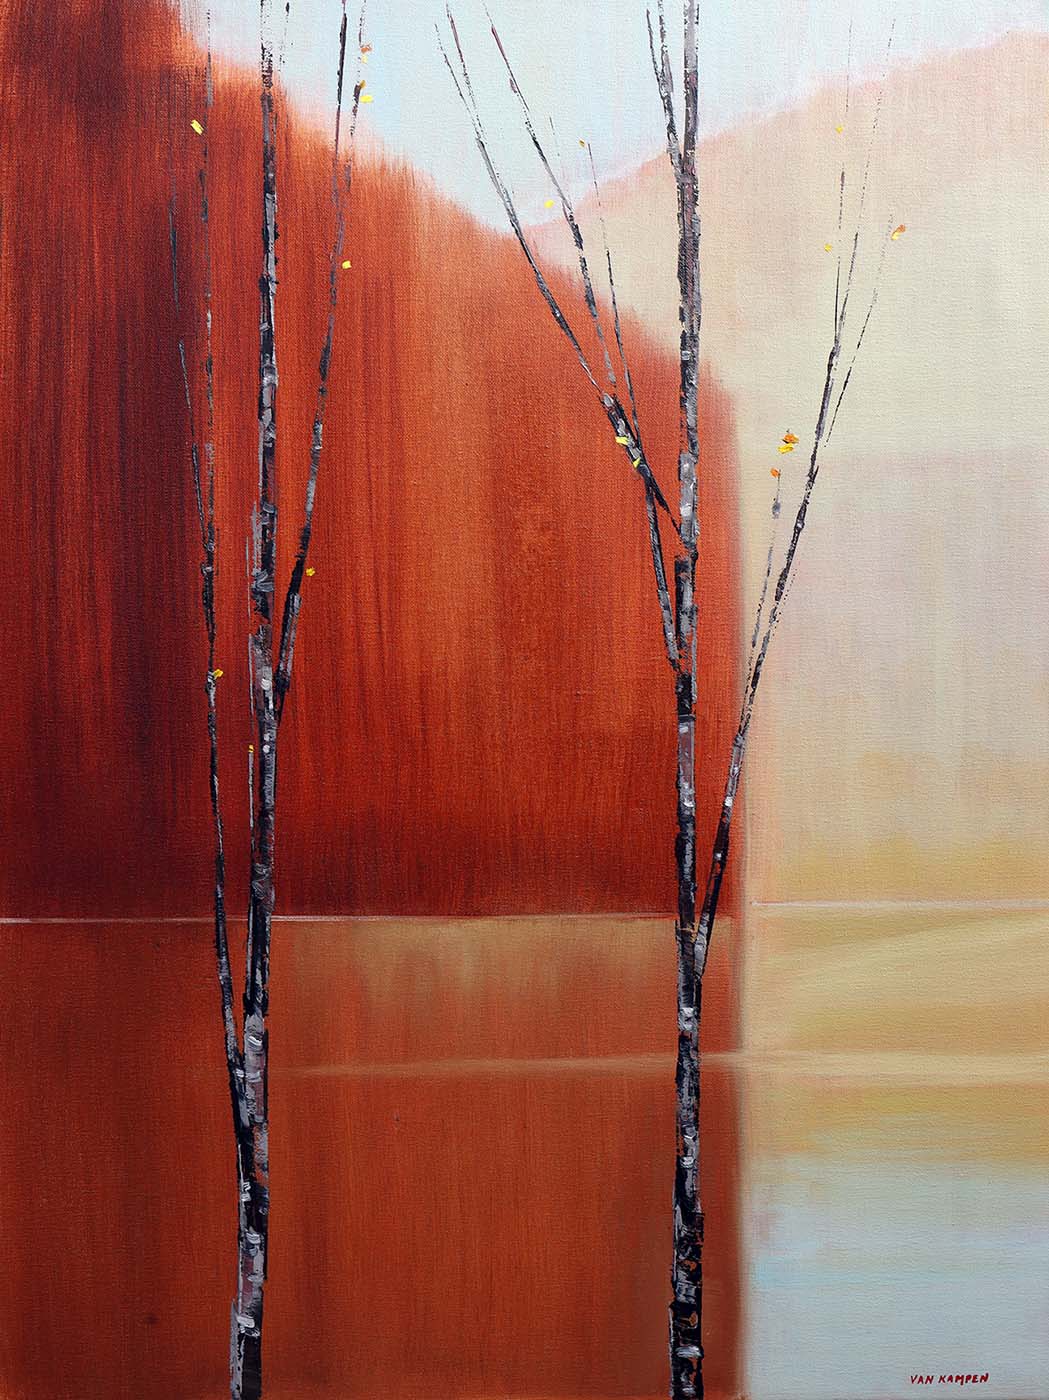 Contemporary art. Title: Autumn Glory, Oil on Canvas, 31.5x24 in by Canadian artist Katherine van Kampen.